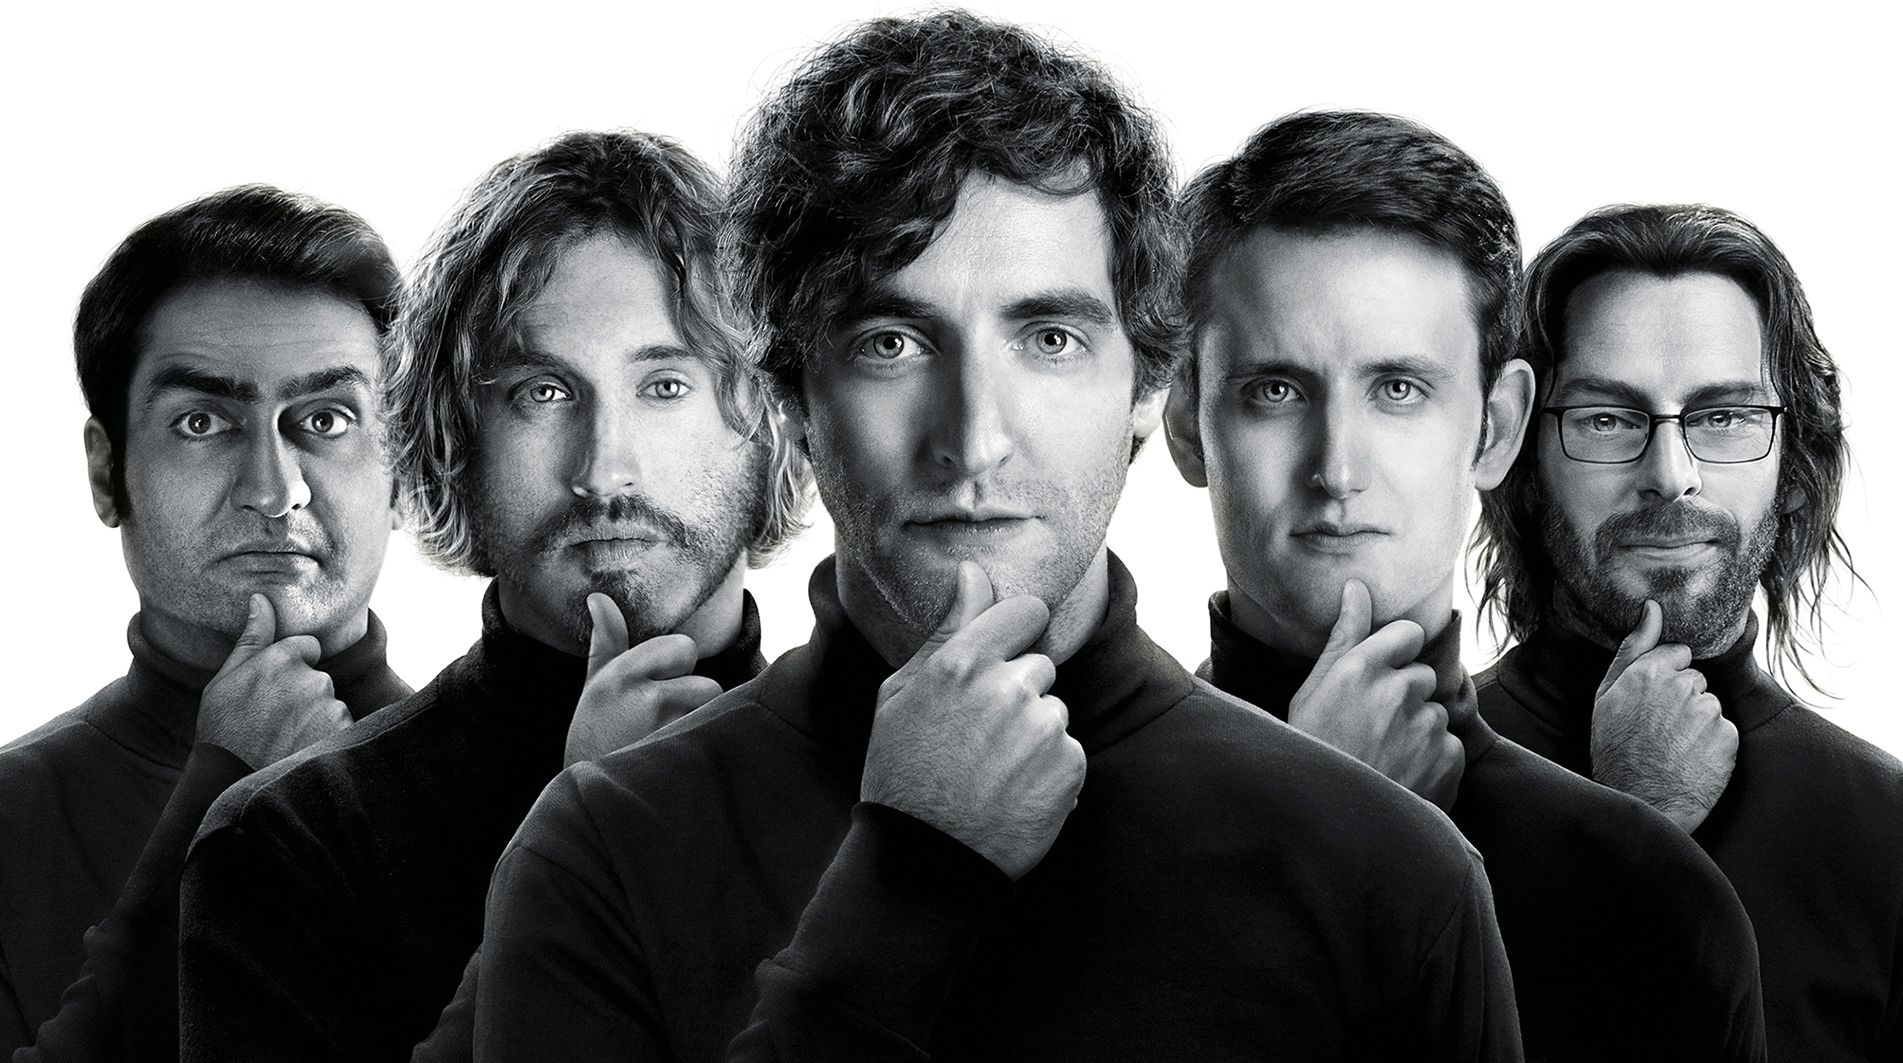 The cast of Silicon Valley